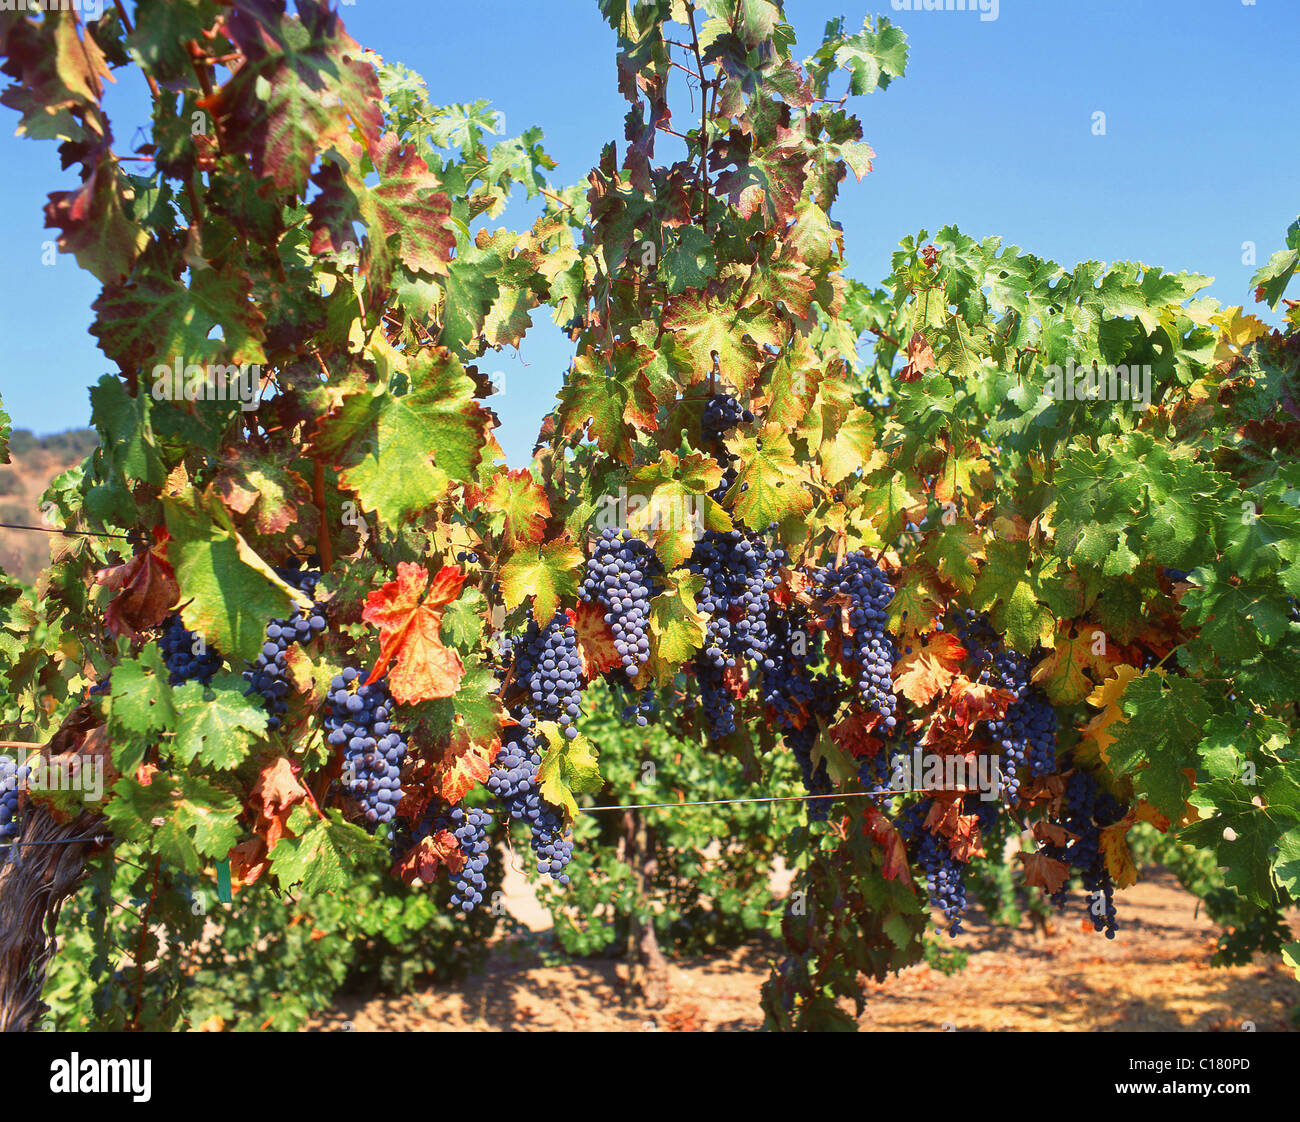 Red grapes on vines, Napa Valley, California, United States of America Stock Photo